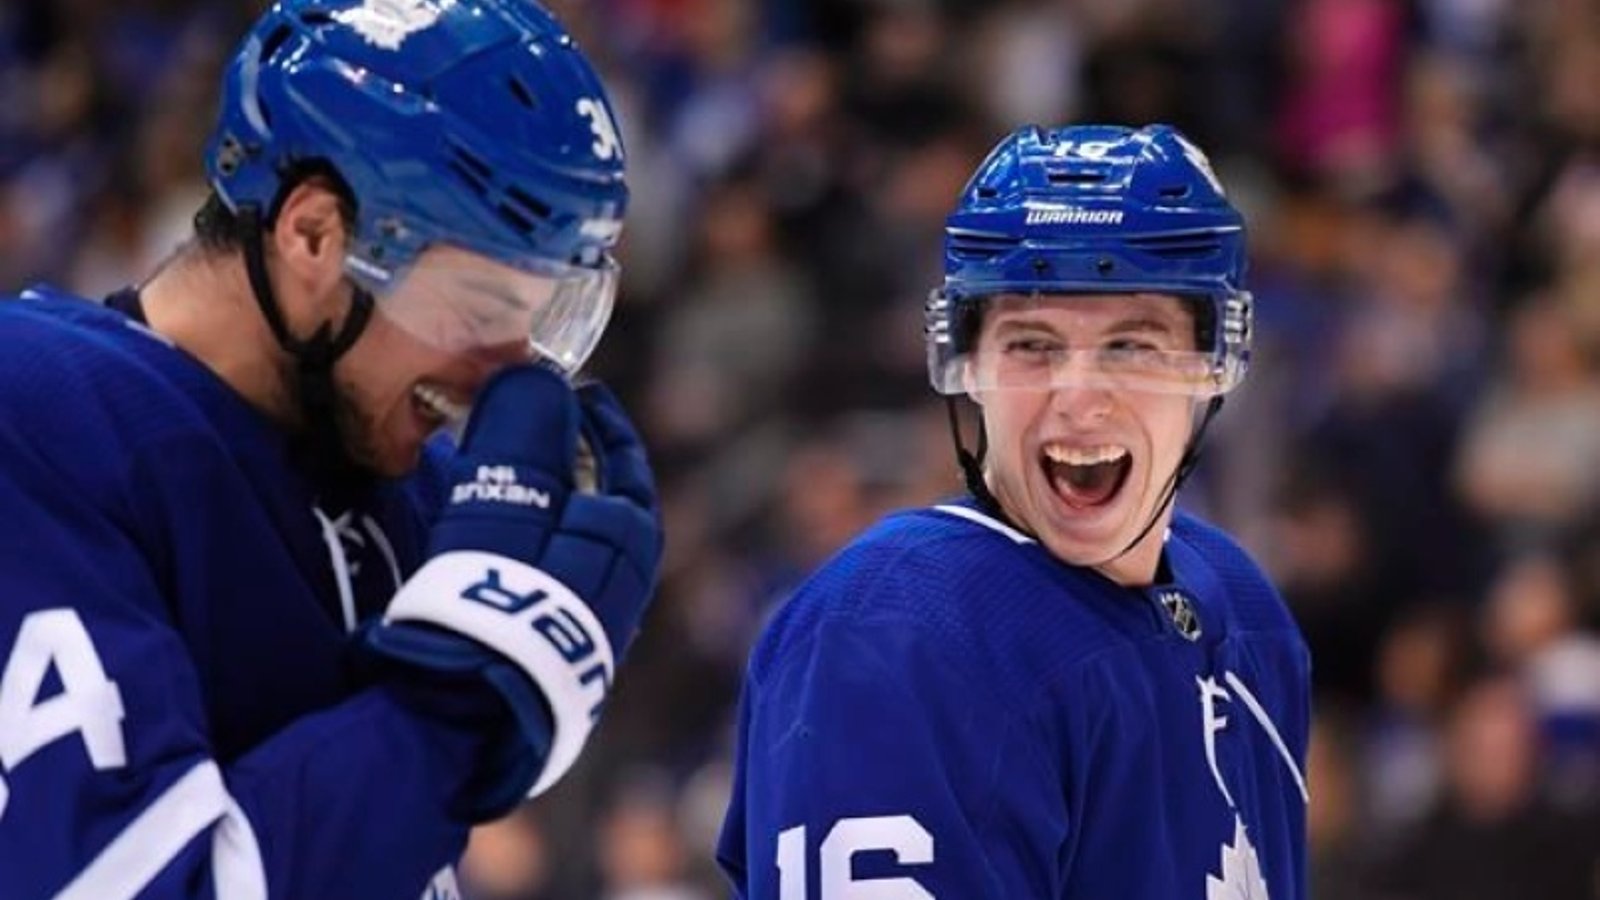 Toronto burger chain promises Marner free cheeseburgers for life if he re-signs